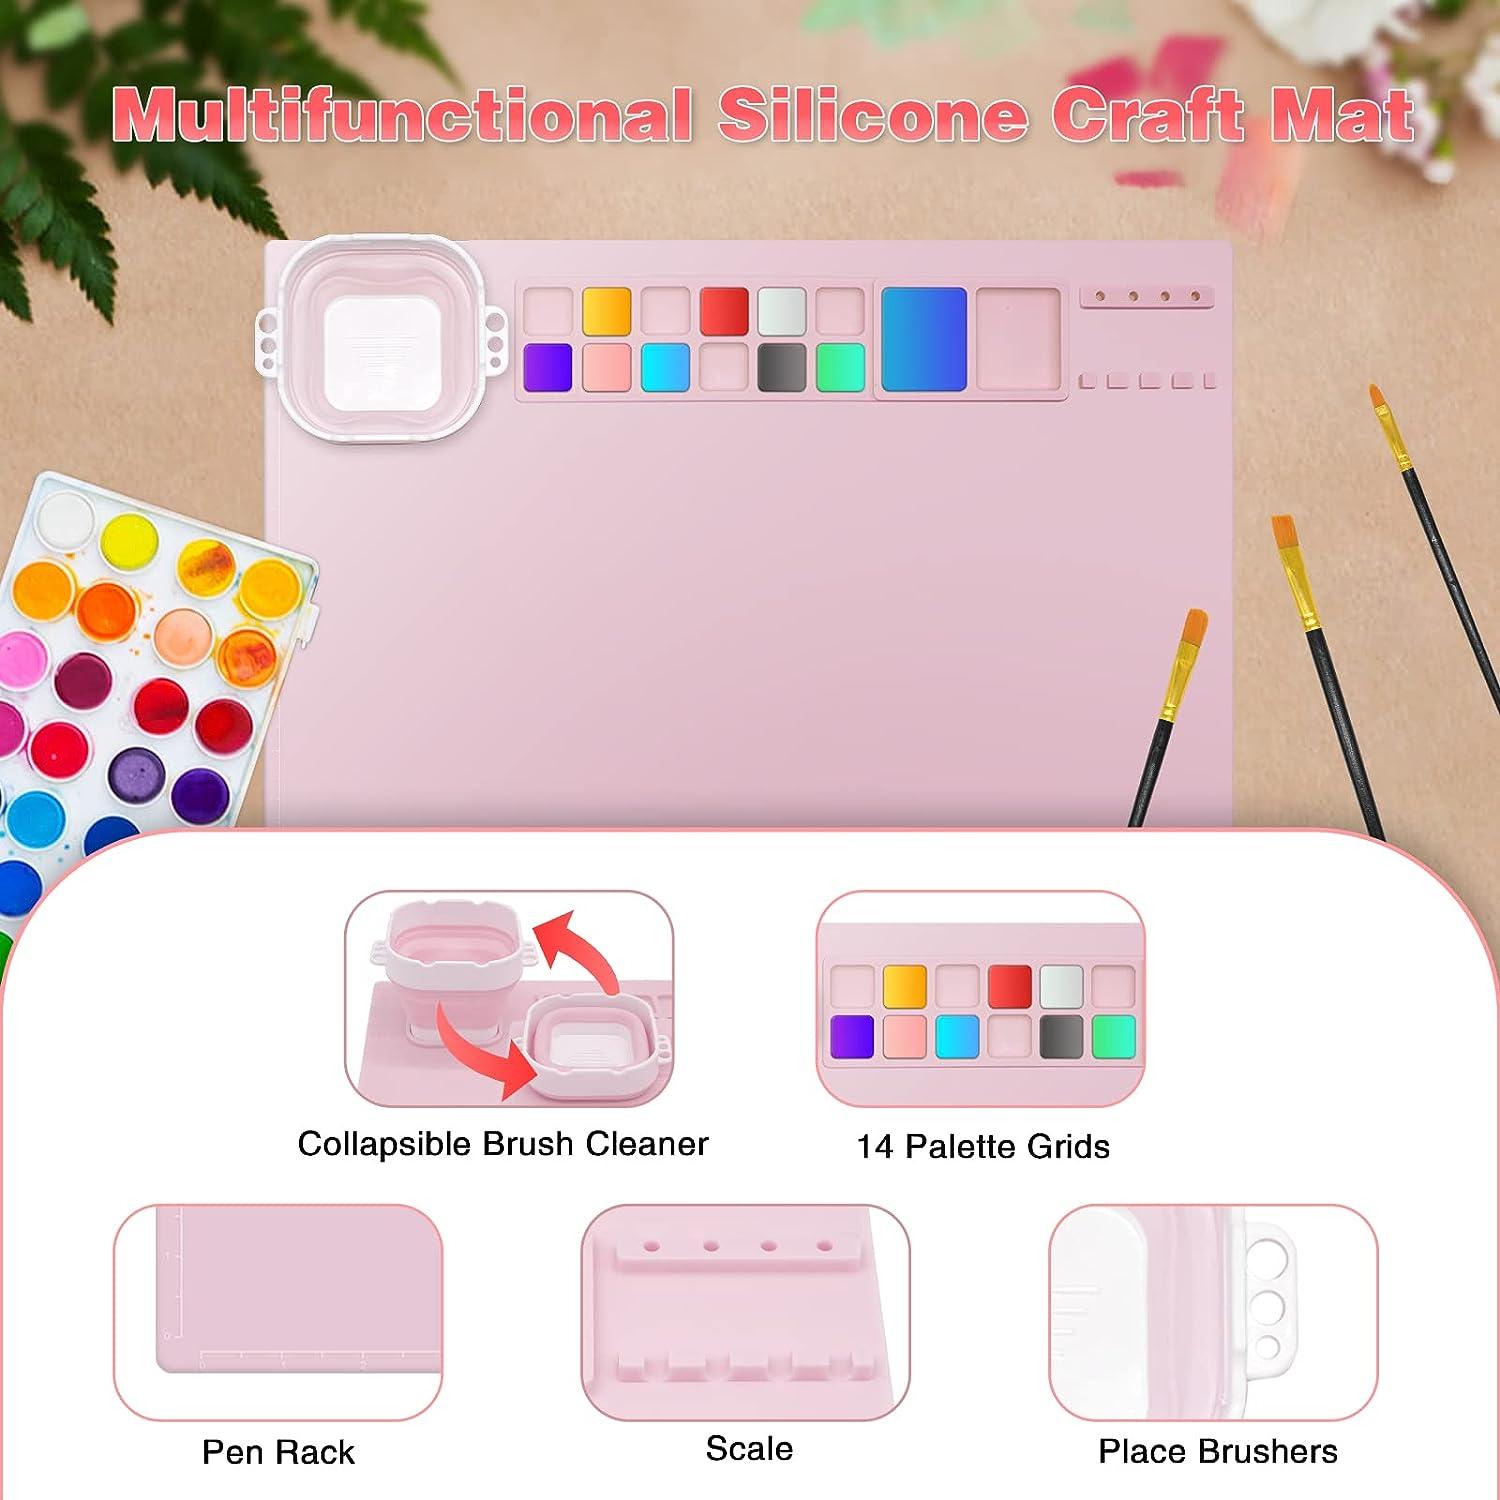 Pradory Silicone Art Mat,20x16 Large Silicone Crafting Mat for Kids,Non-Stick  Silicone Artist Mat with Water Cup/Sponge/12 Paint Dividers for Crafts, Painting,Art,Resin,Table,Clay,DIY Creations-Pink